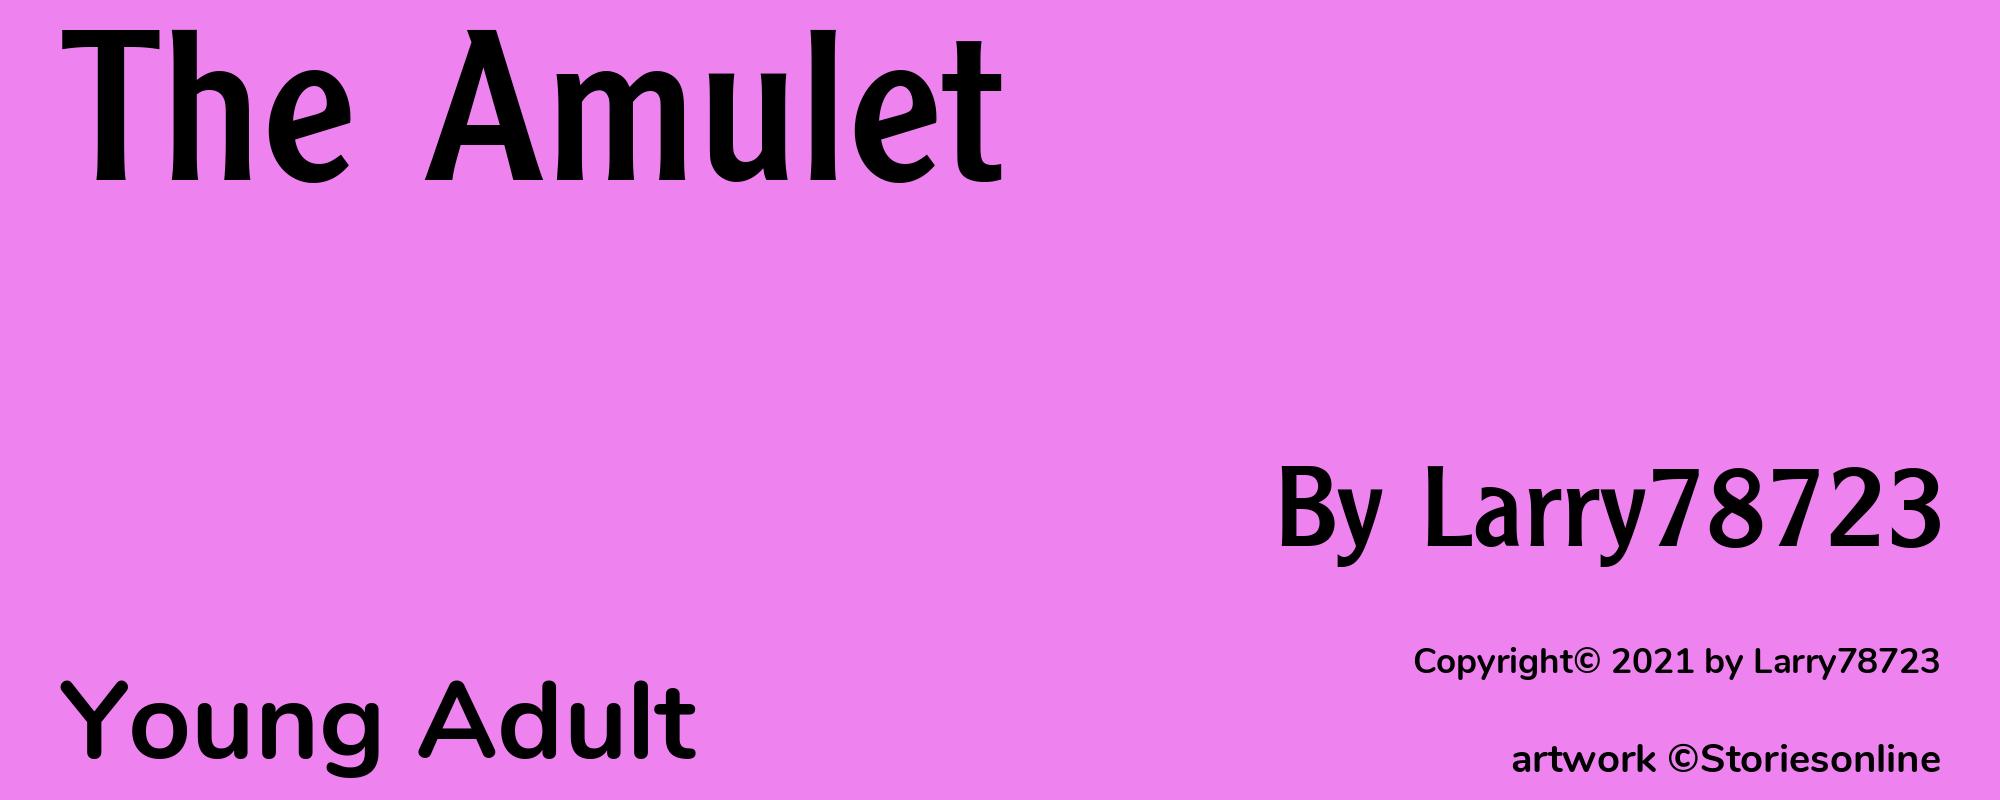 The Amulet - Cover